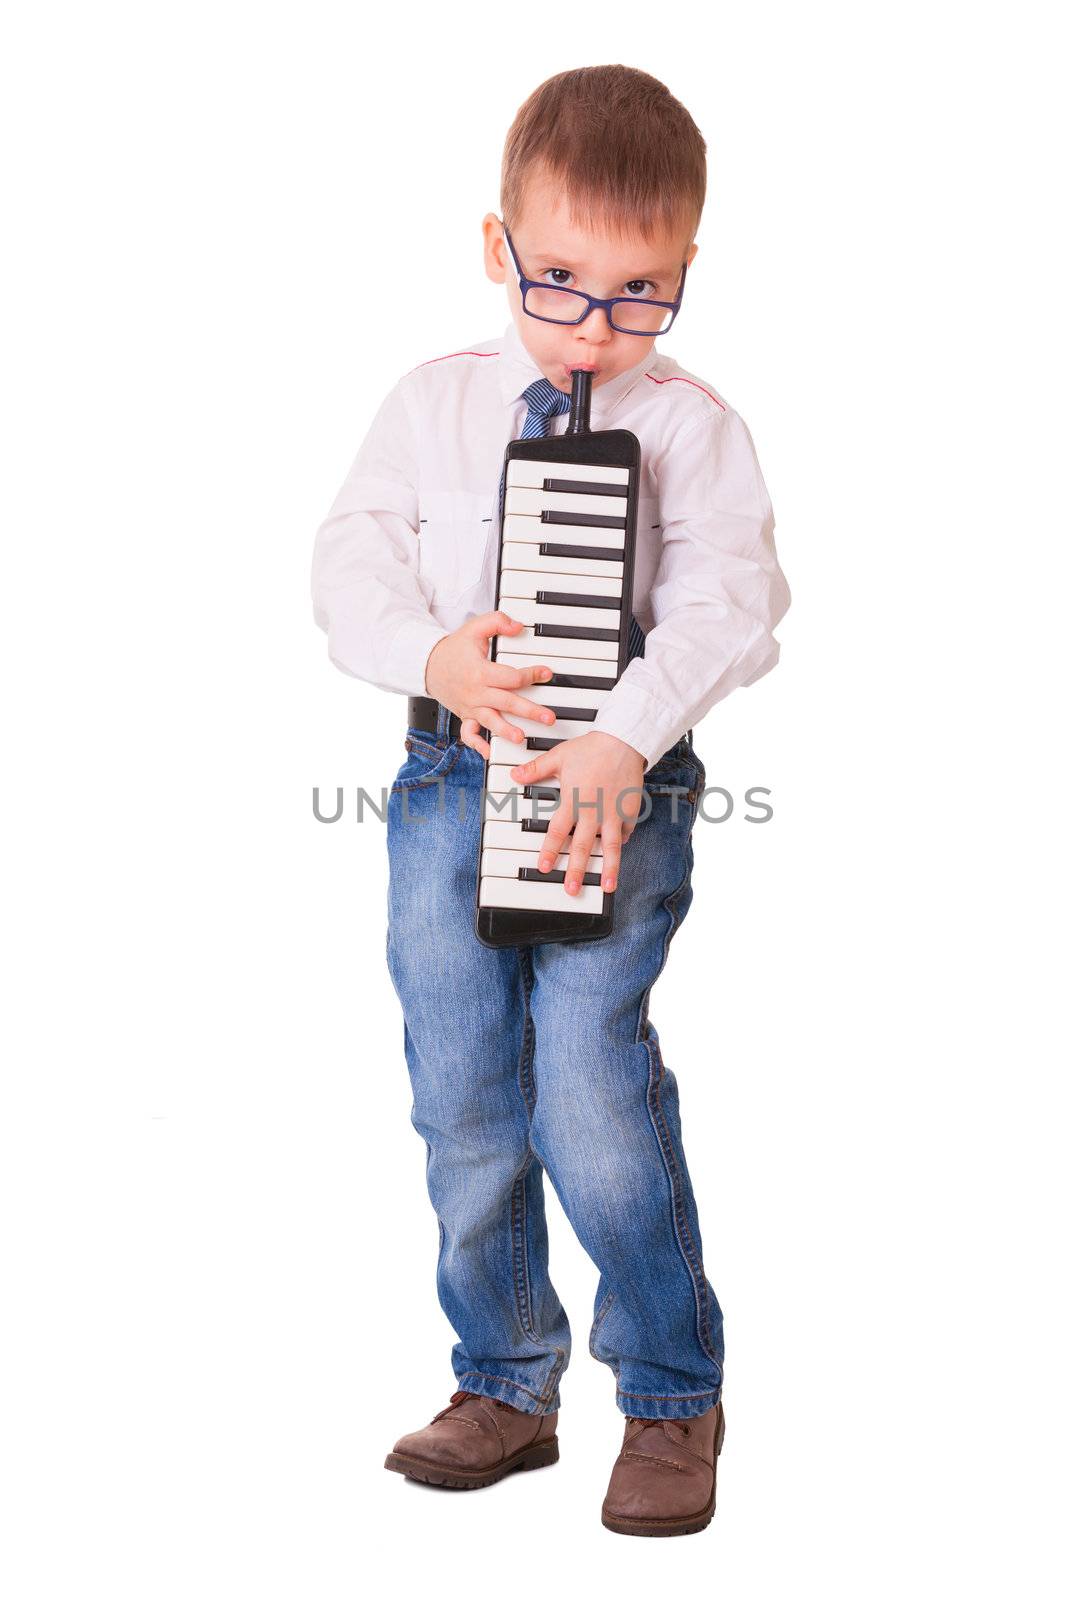 Preschool boy in glasses, jeans and white shirt playing melodica, isolated on white background